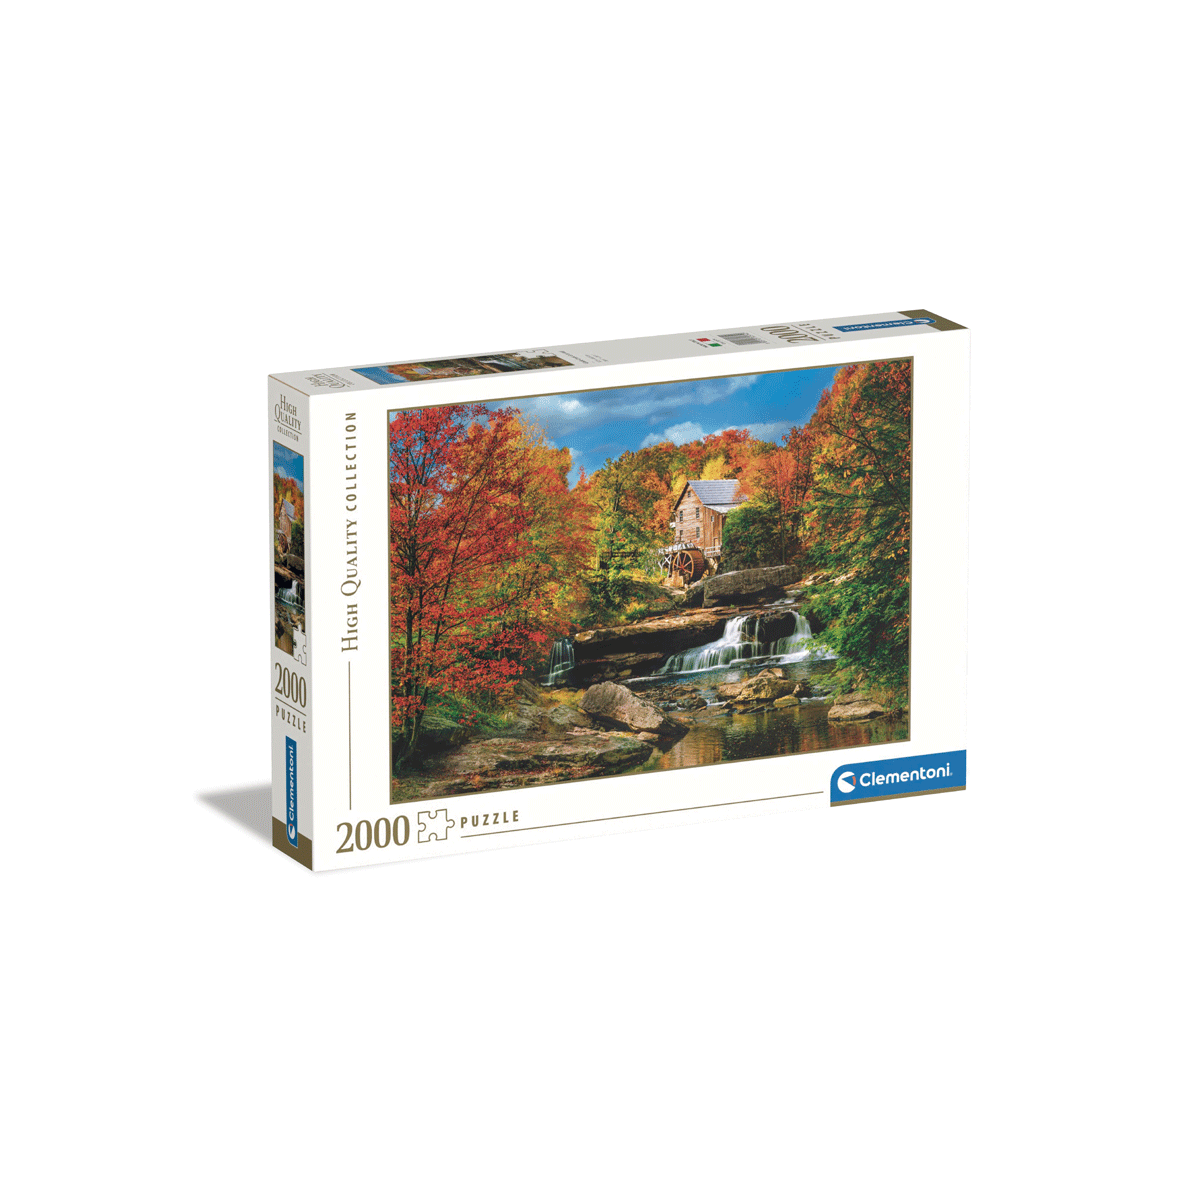 Clementoni puzzle high quality collection - glade creek grist mill - 2000 pezzi, puzzle adulti - CLEMENTONI